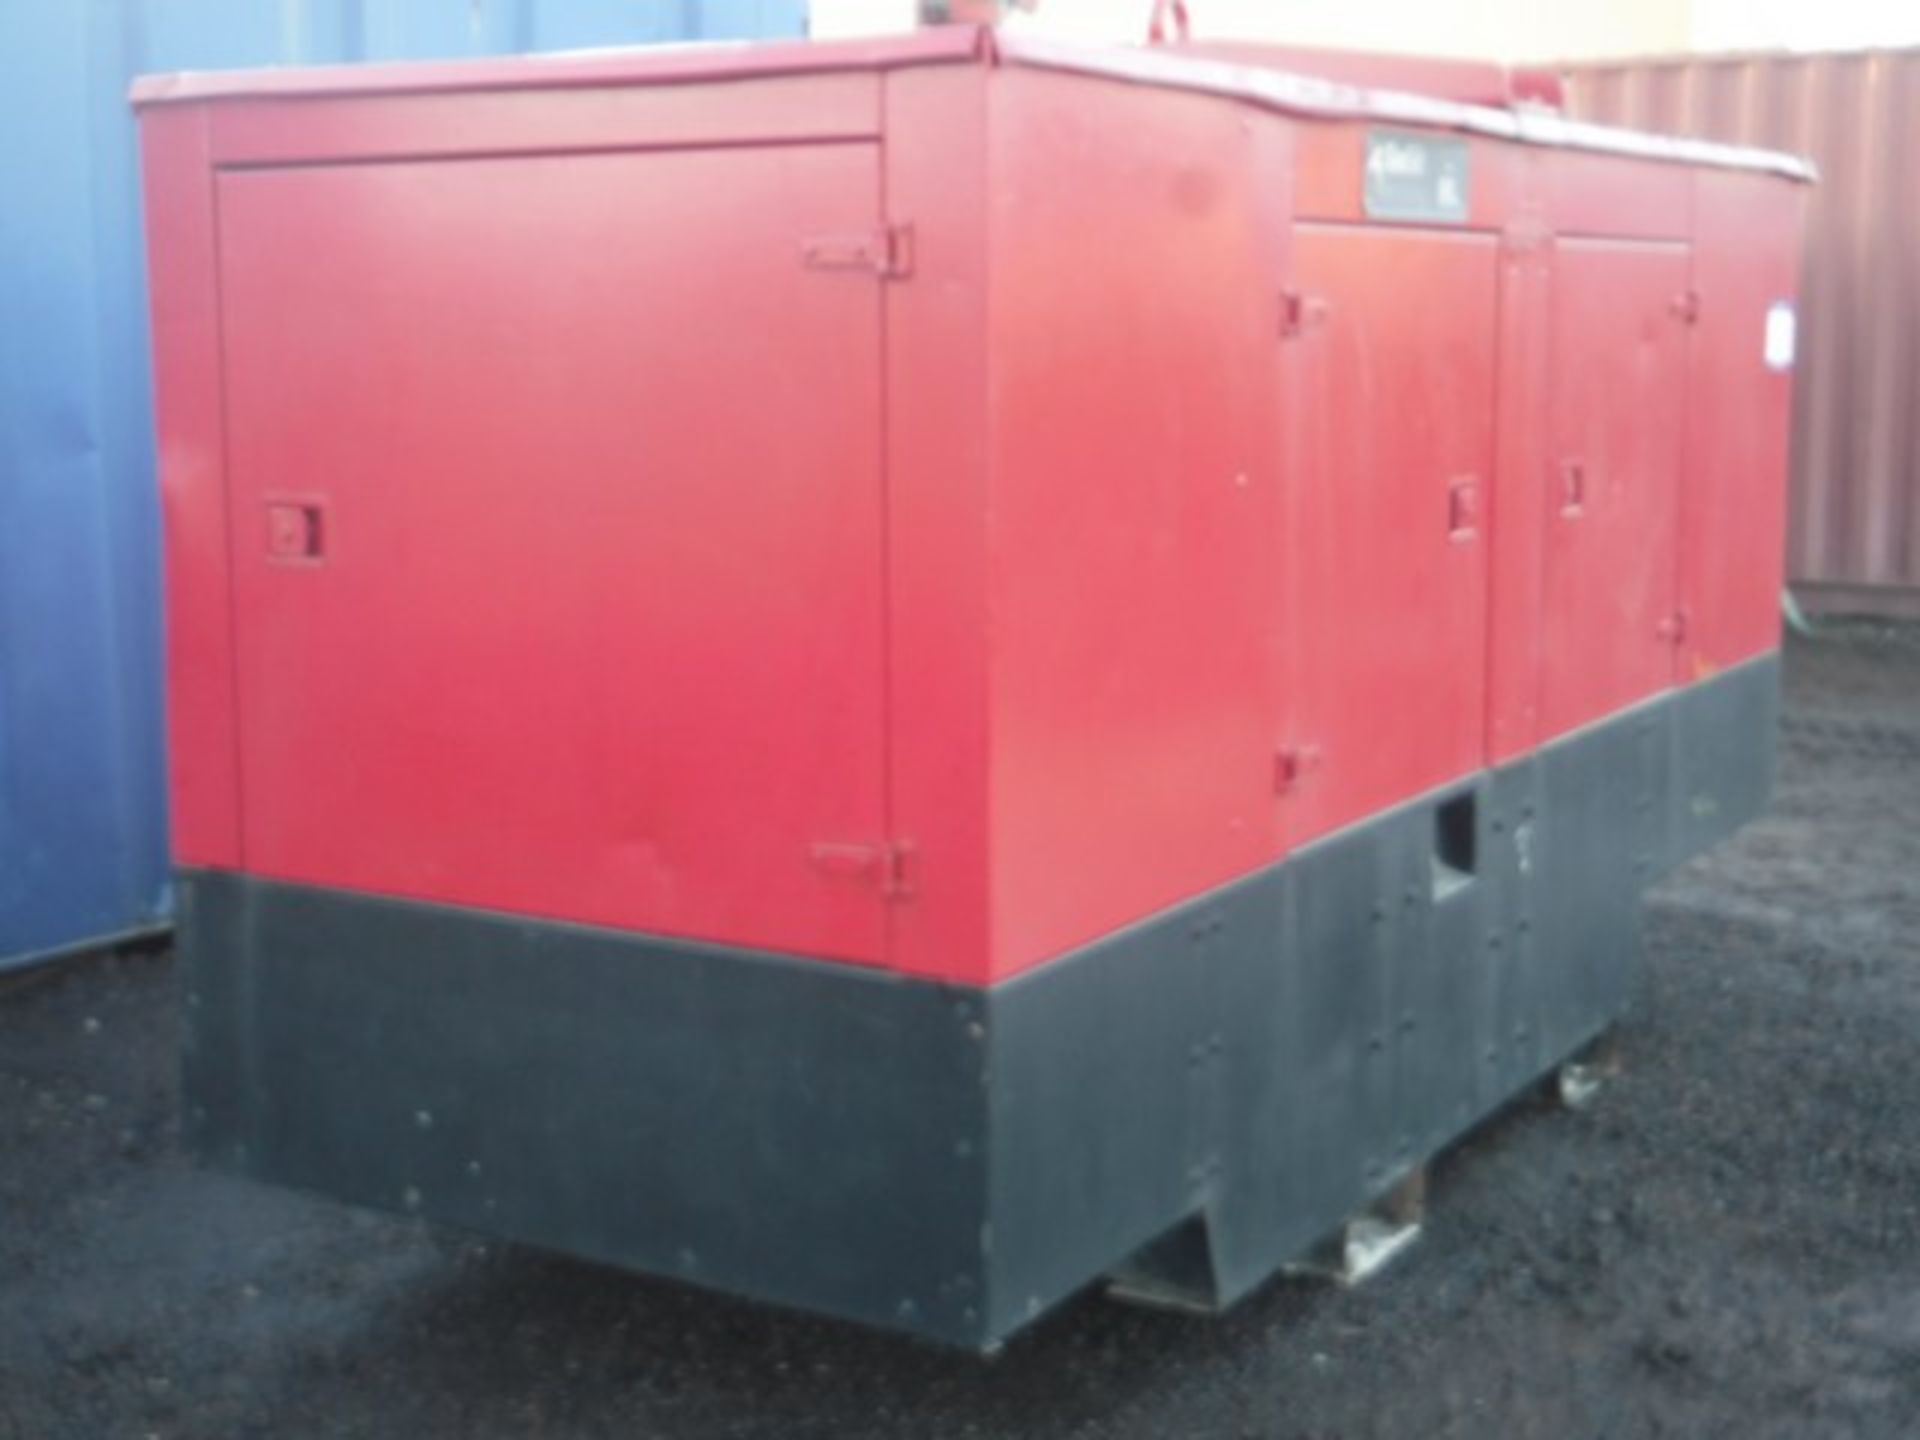 GENSET MG115SS-D GENERATOR 110KVA - 8136HRS (NOT VERIFIED) YEAR 2007 - Image 19 of 19